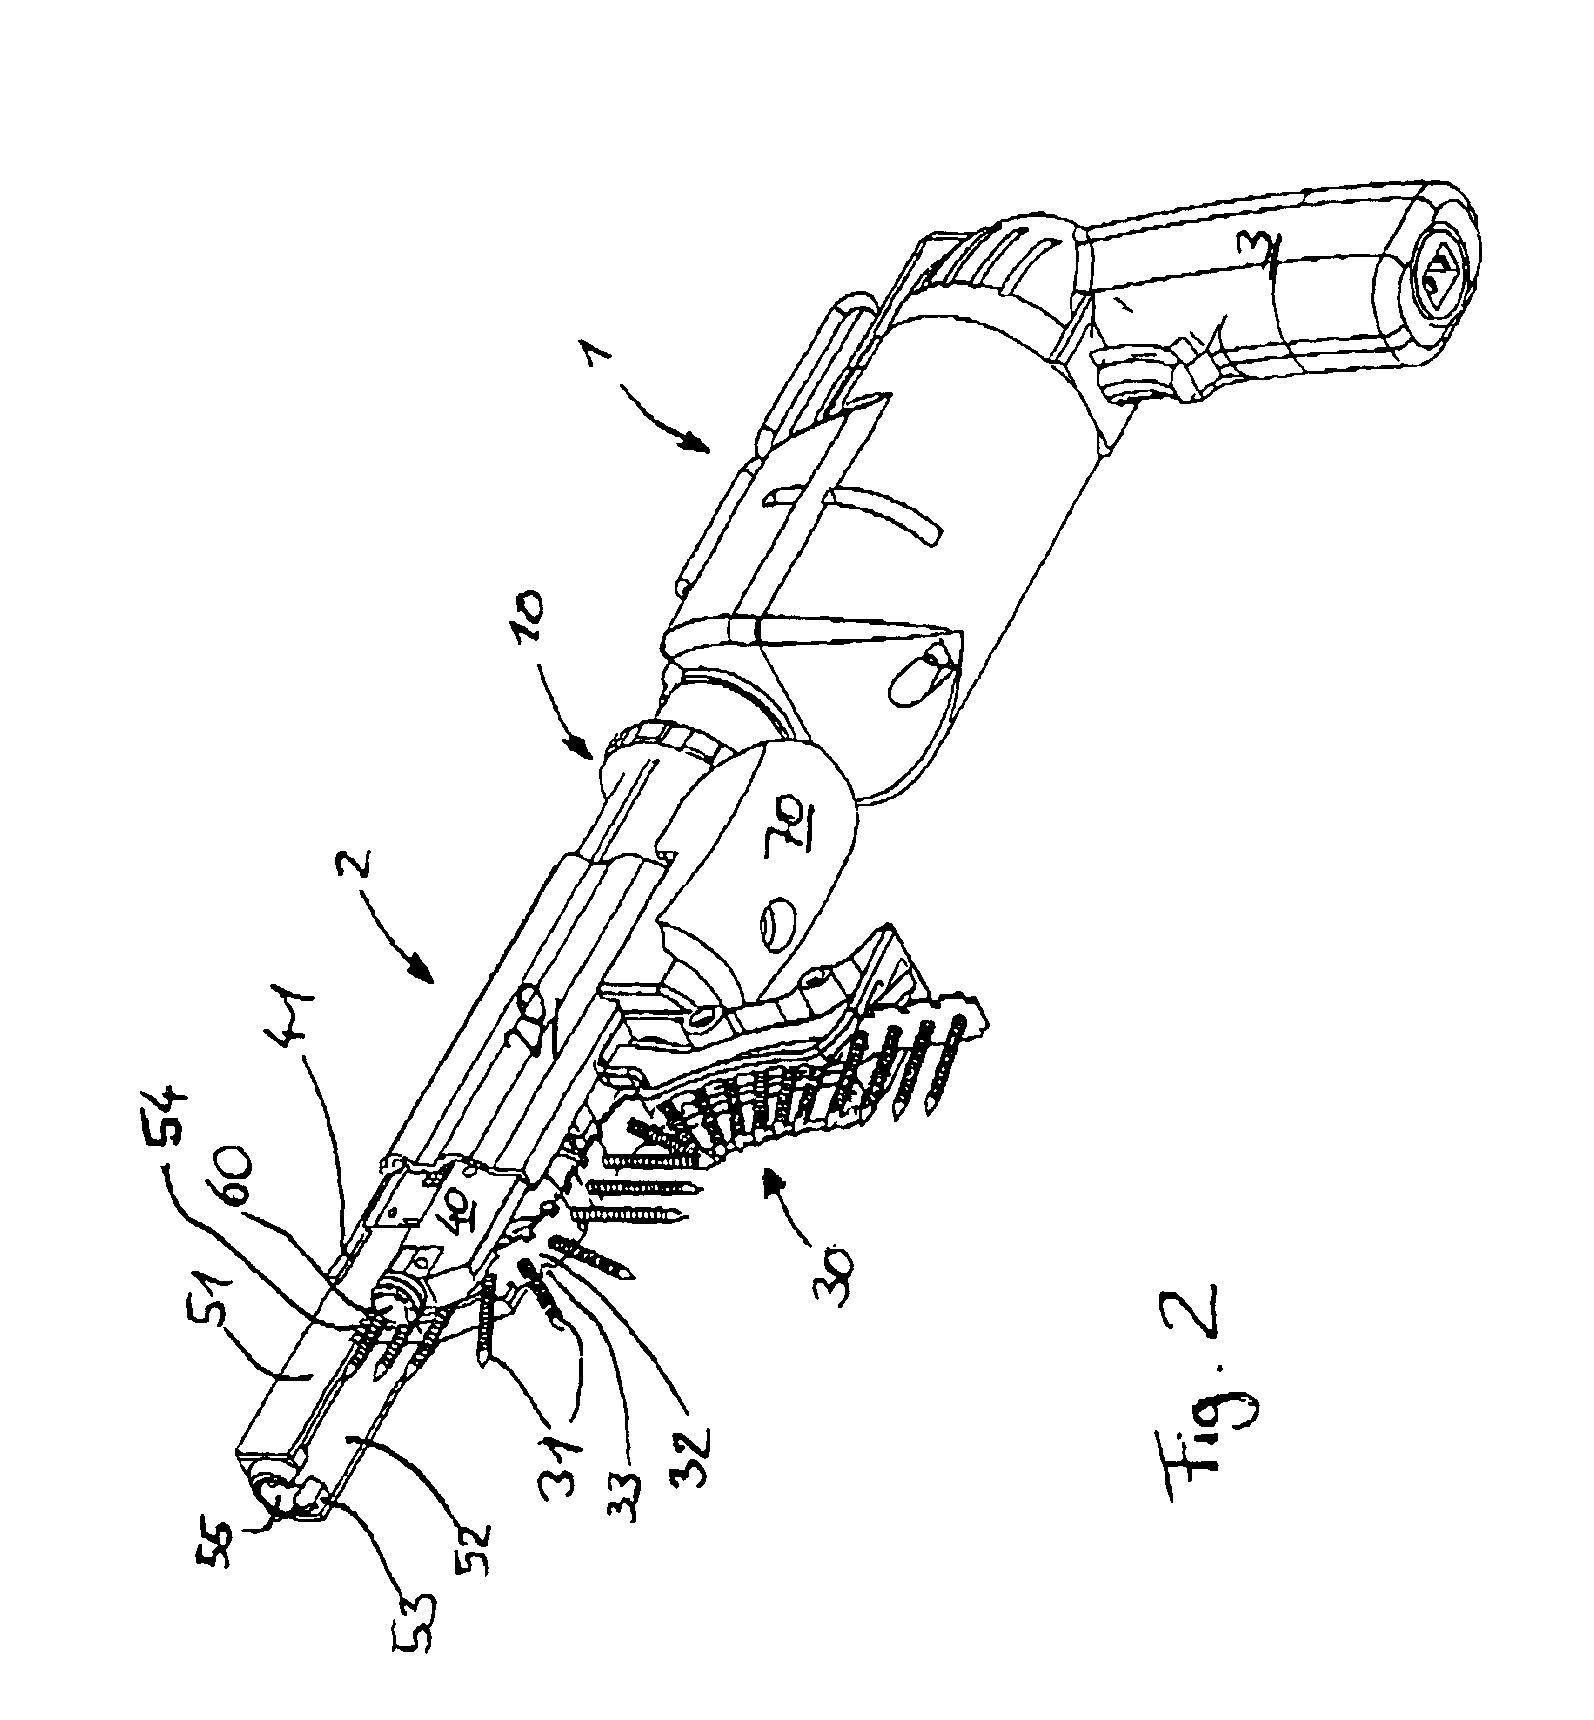 Apparatus for driving fasteners, including screws, nails, pop riverts and staples